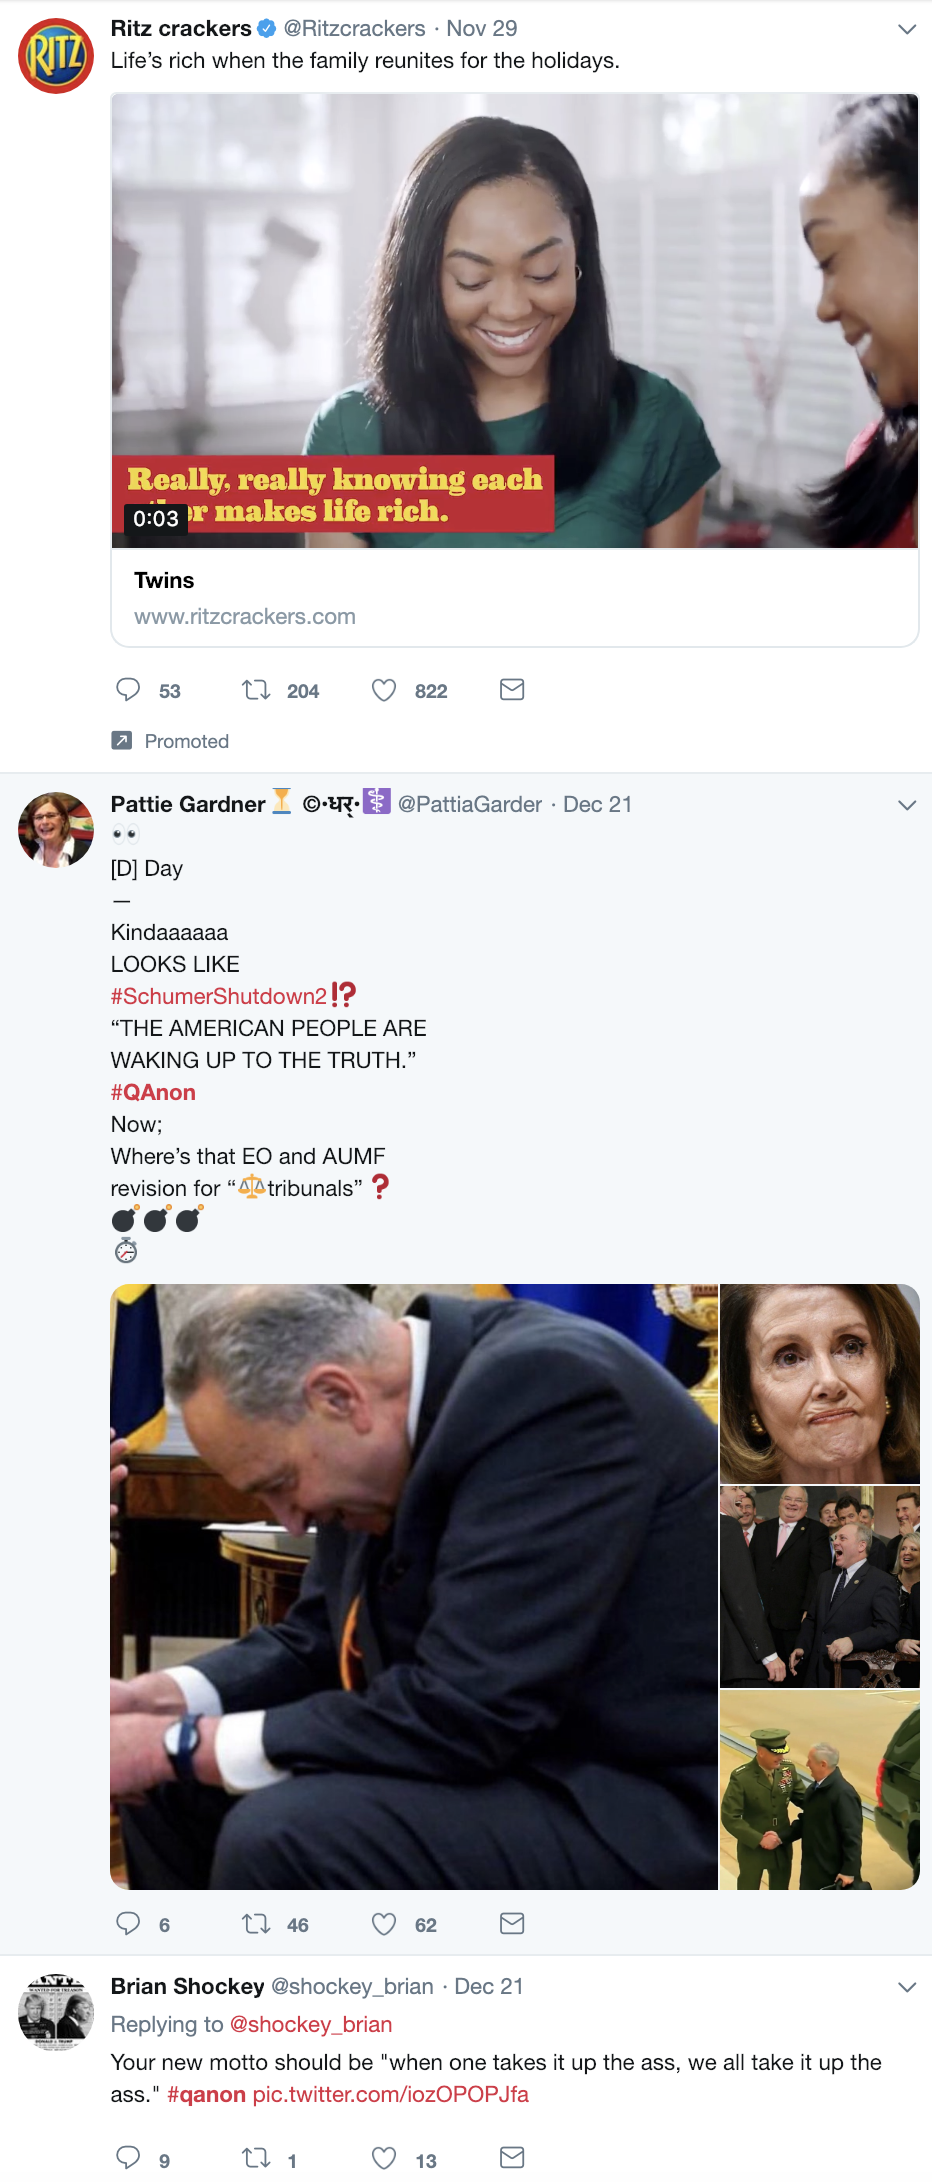 Screen-Shot-2018-12-23-at-10.44.38-AM Trump-Supporting 'QAnon' Conspiracy Theorists Whine About Being Alone For X-Mas Corruption Donald Trump Election 2016 Election 2018 Election 2020 Social Media Top Stories 